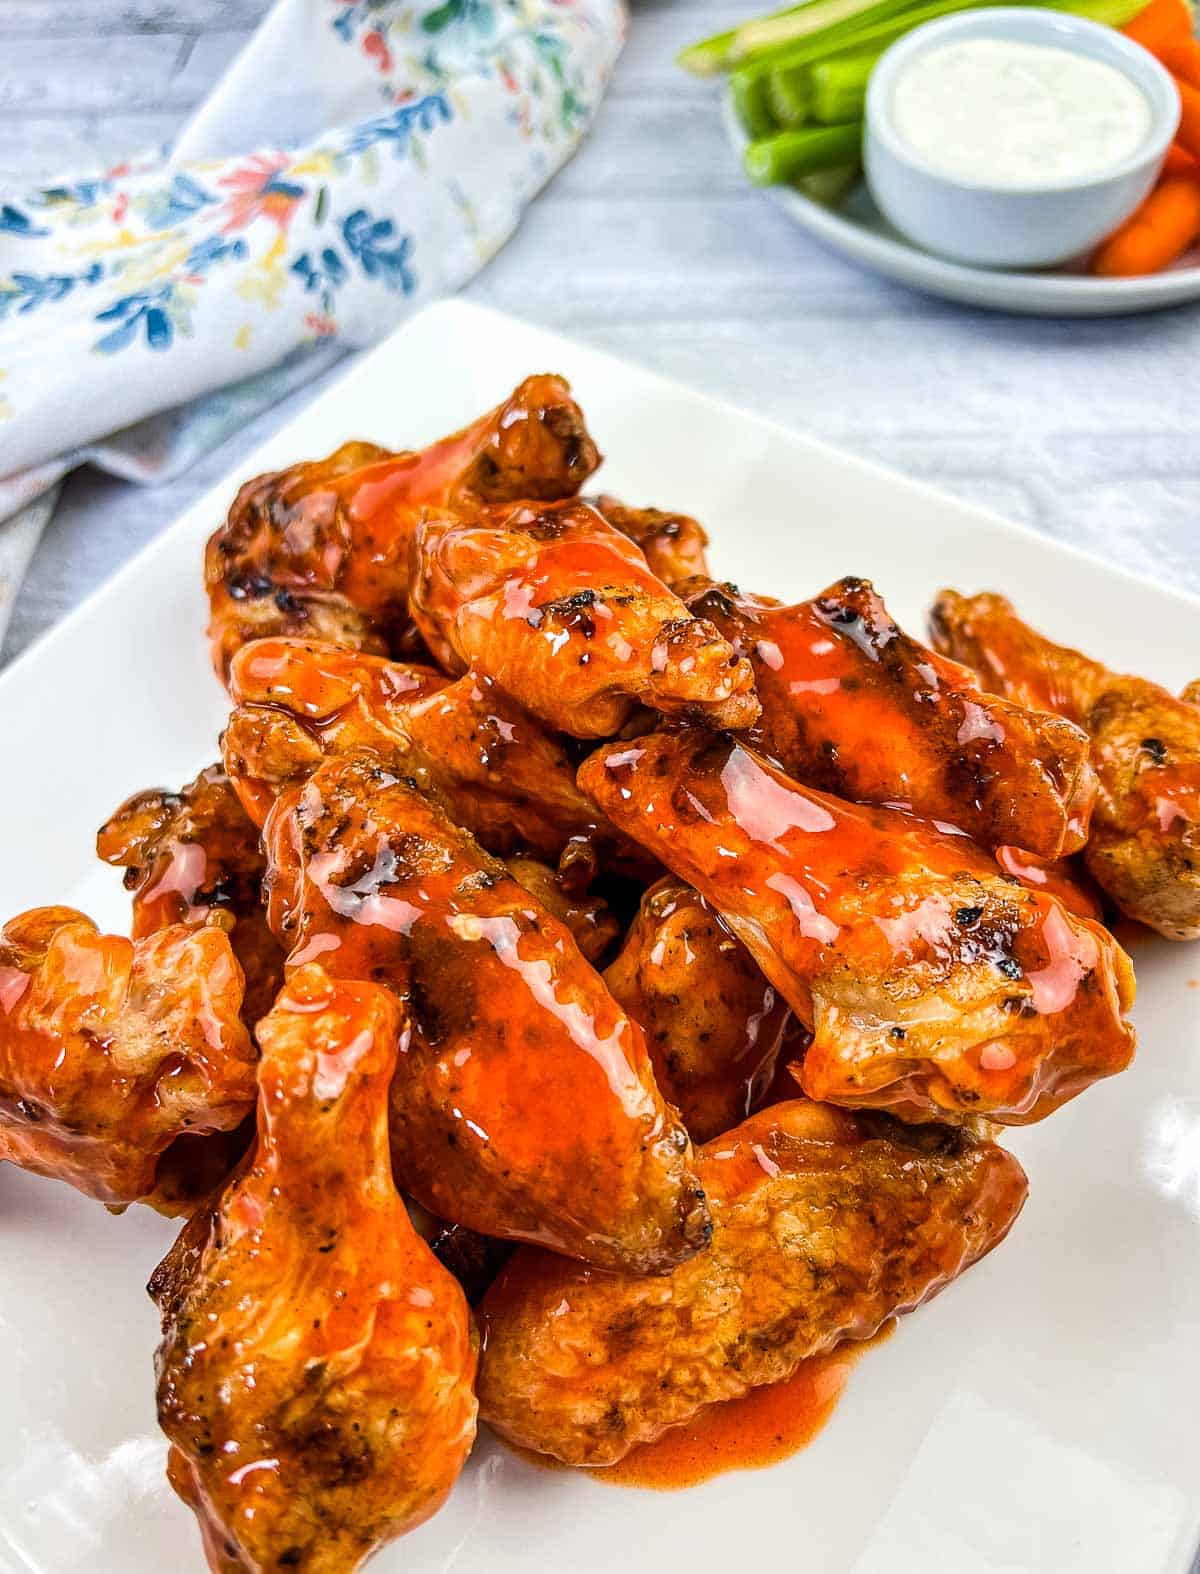 Grilled Wings with Buffalo Sauce on a plate.